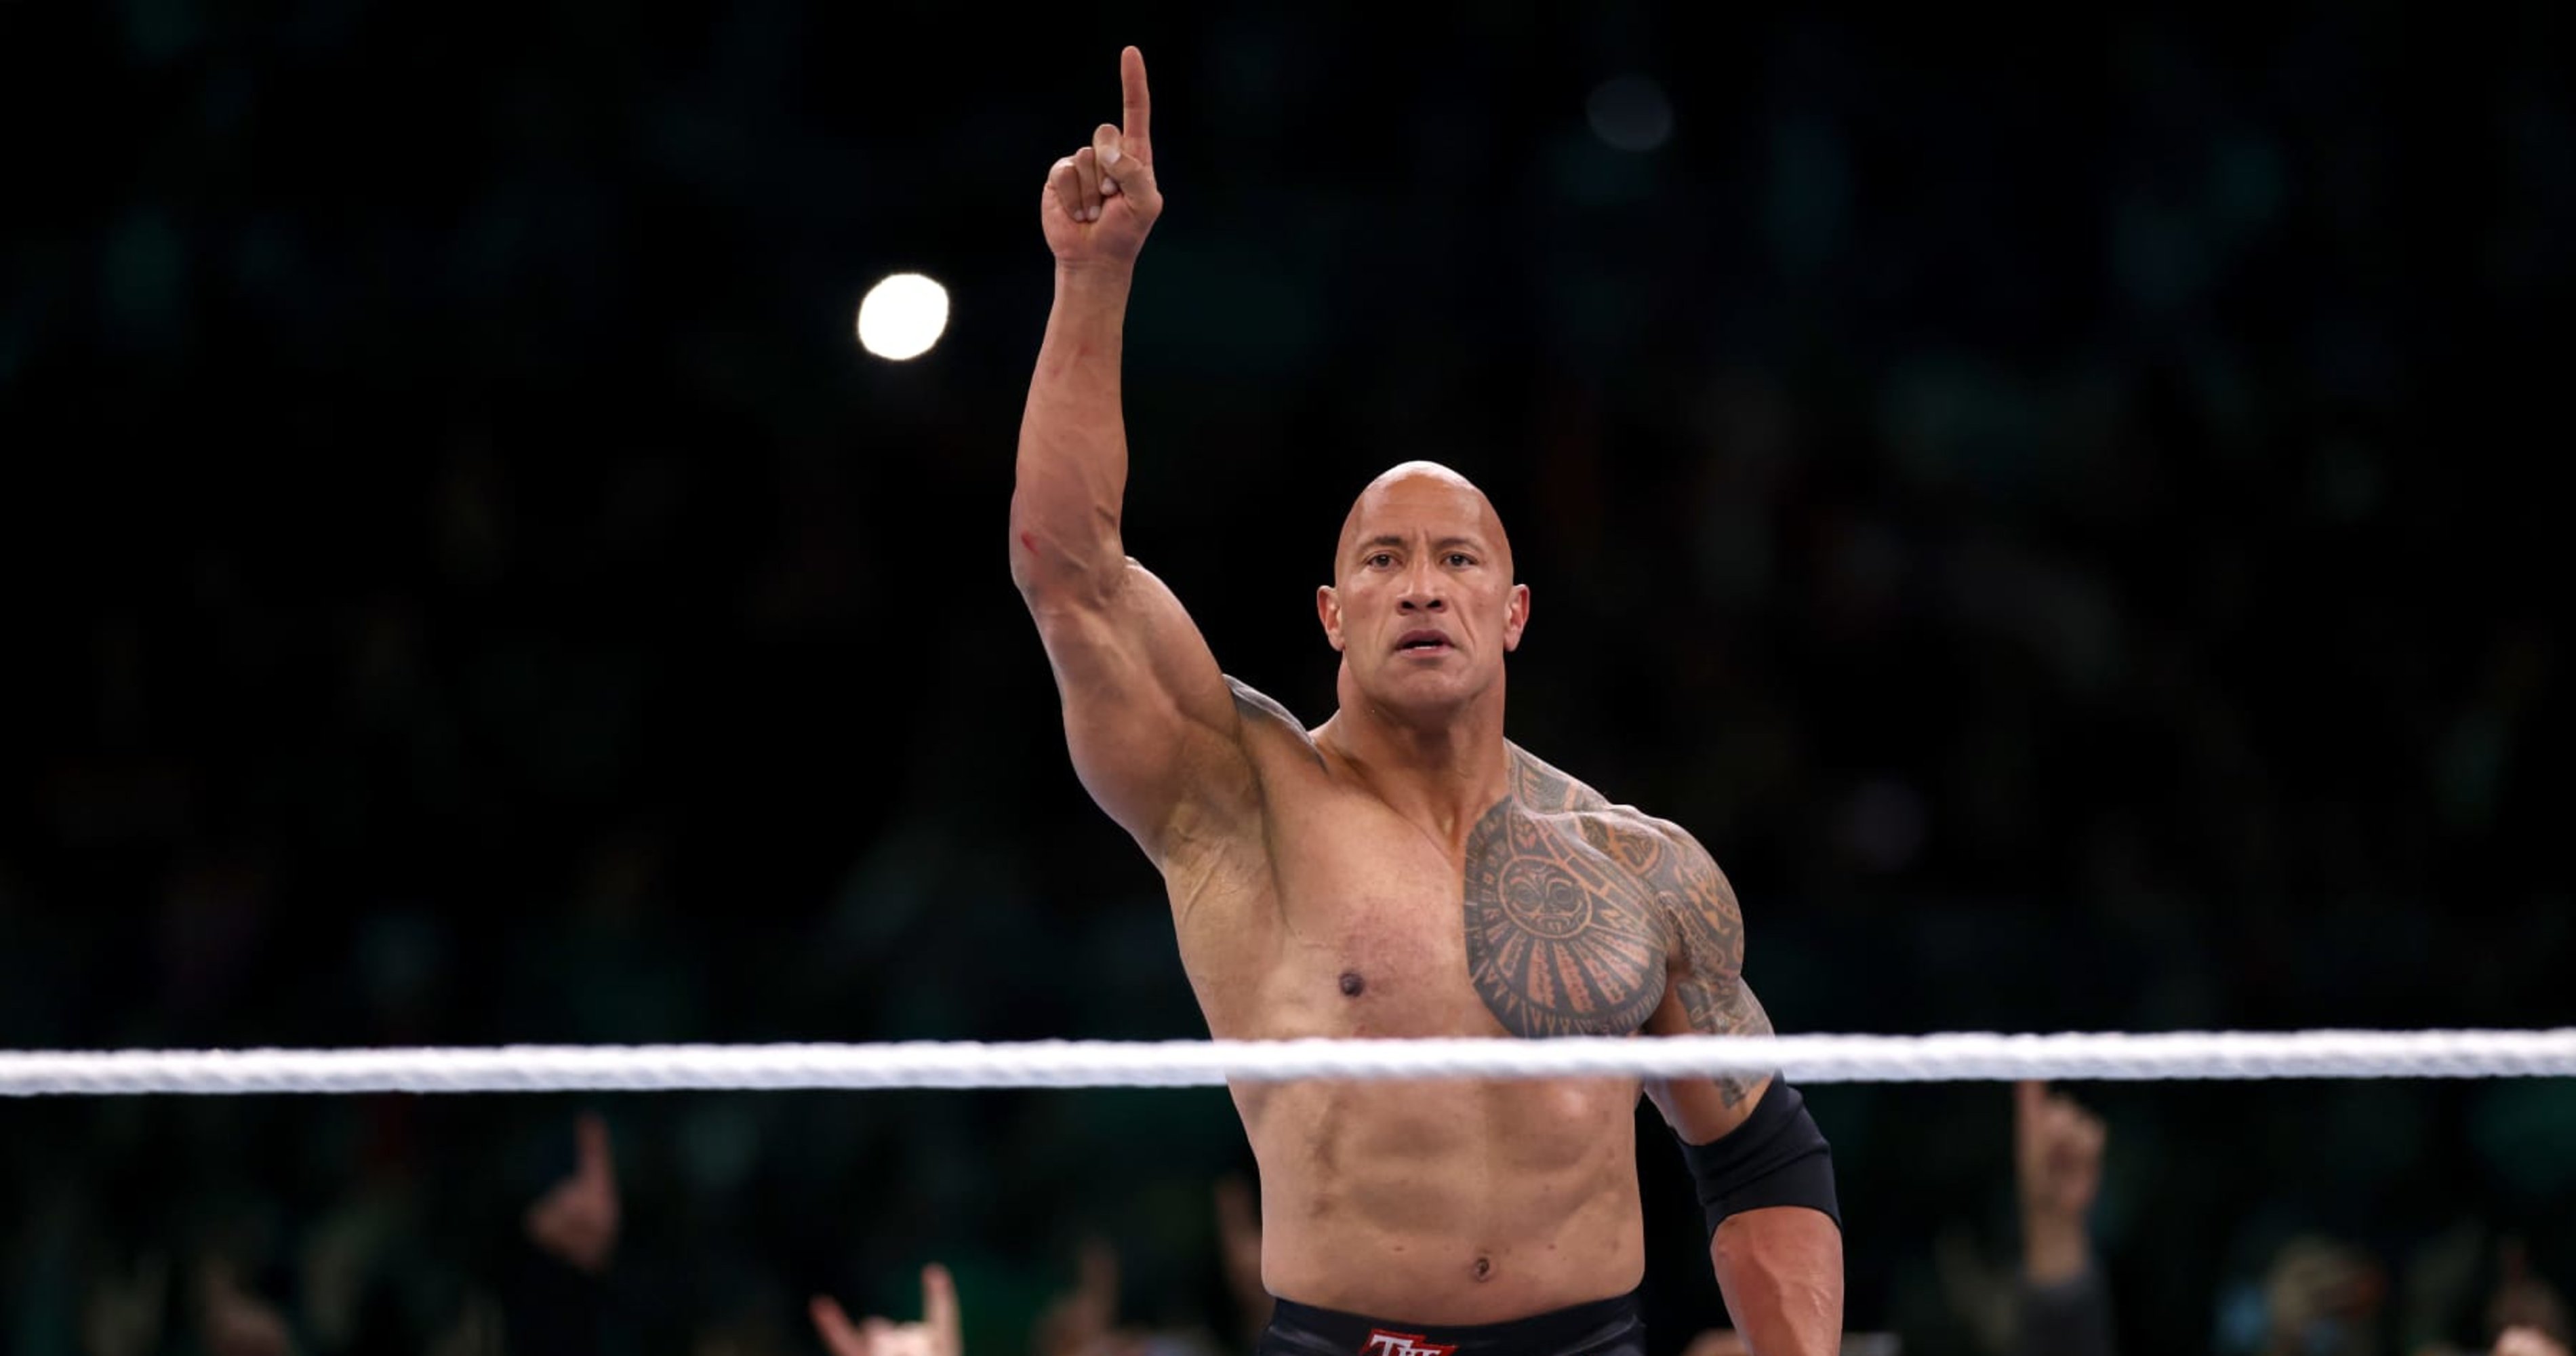 WWE WrestleMania 40 Results: Star Ratings for All Matches from Saturday's Card